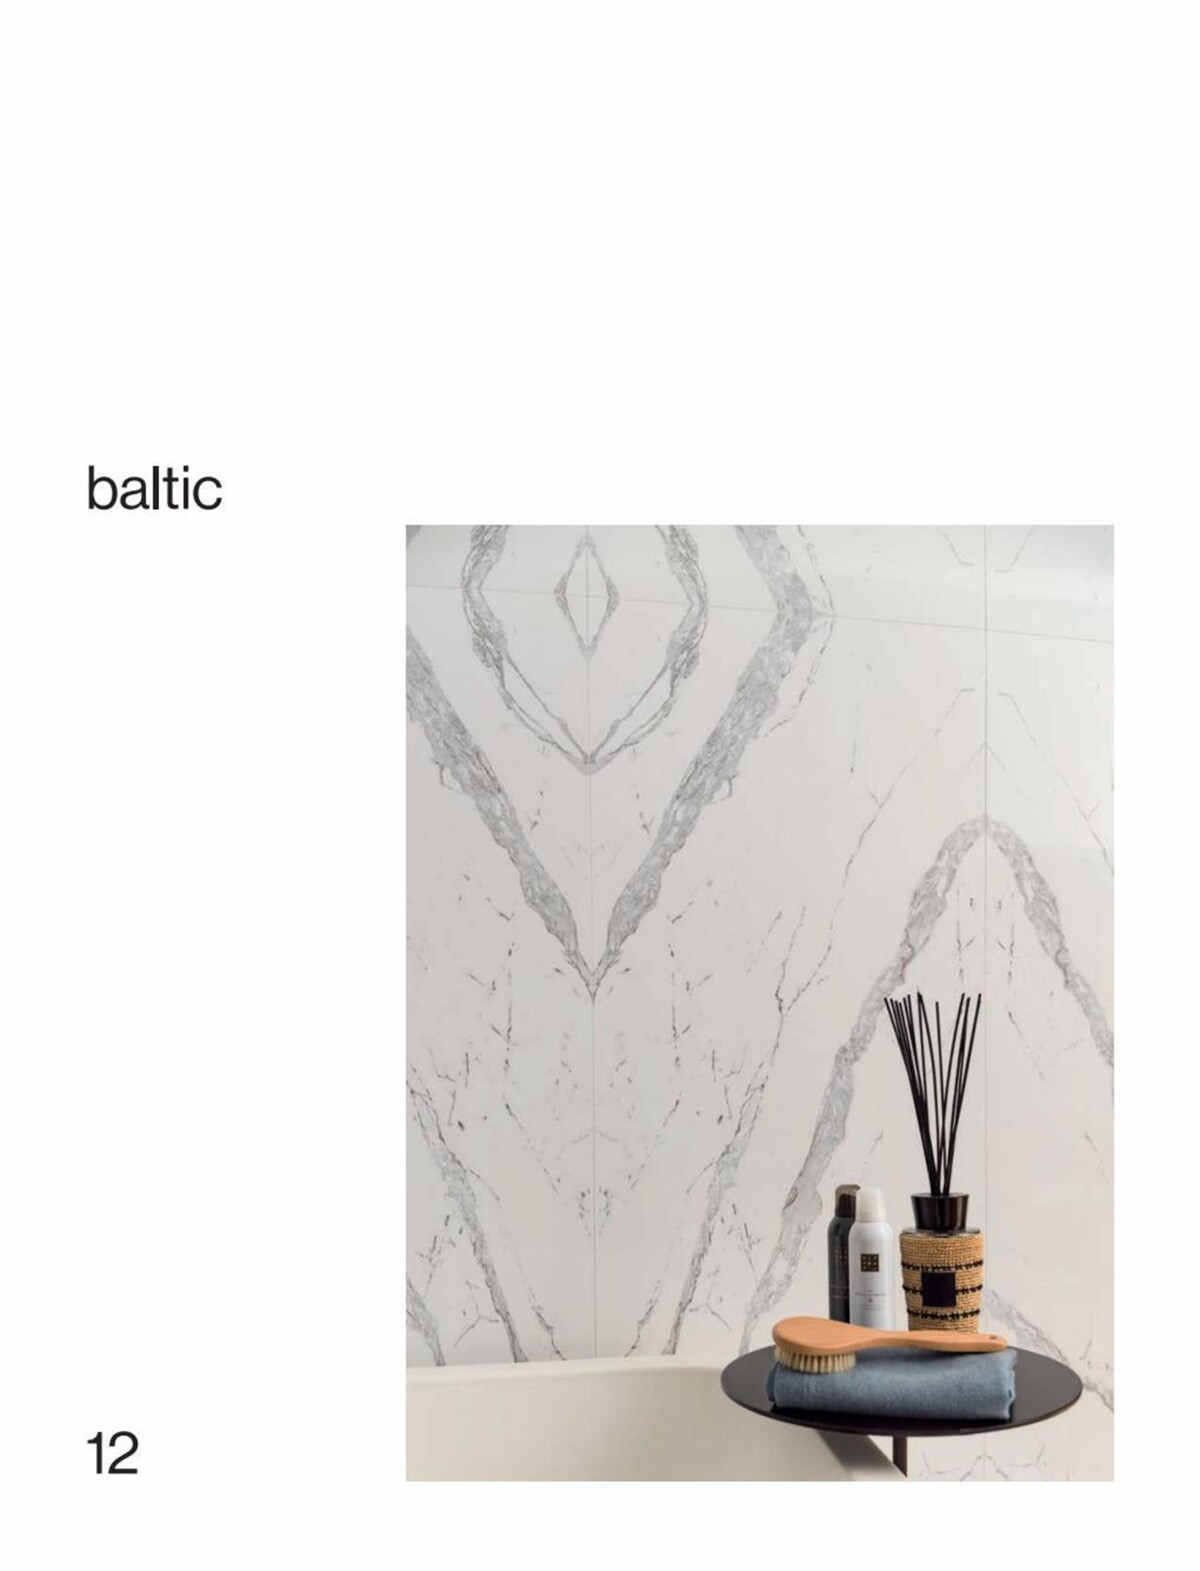 Catalogue MARMI,a ceramic tile that echoes the purity of marble, page 00012